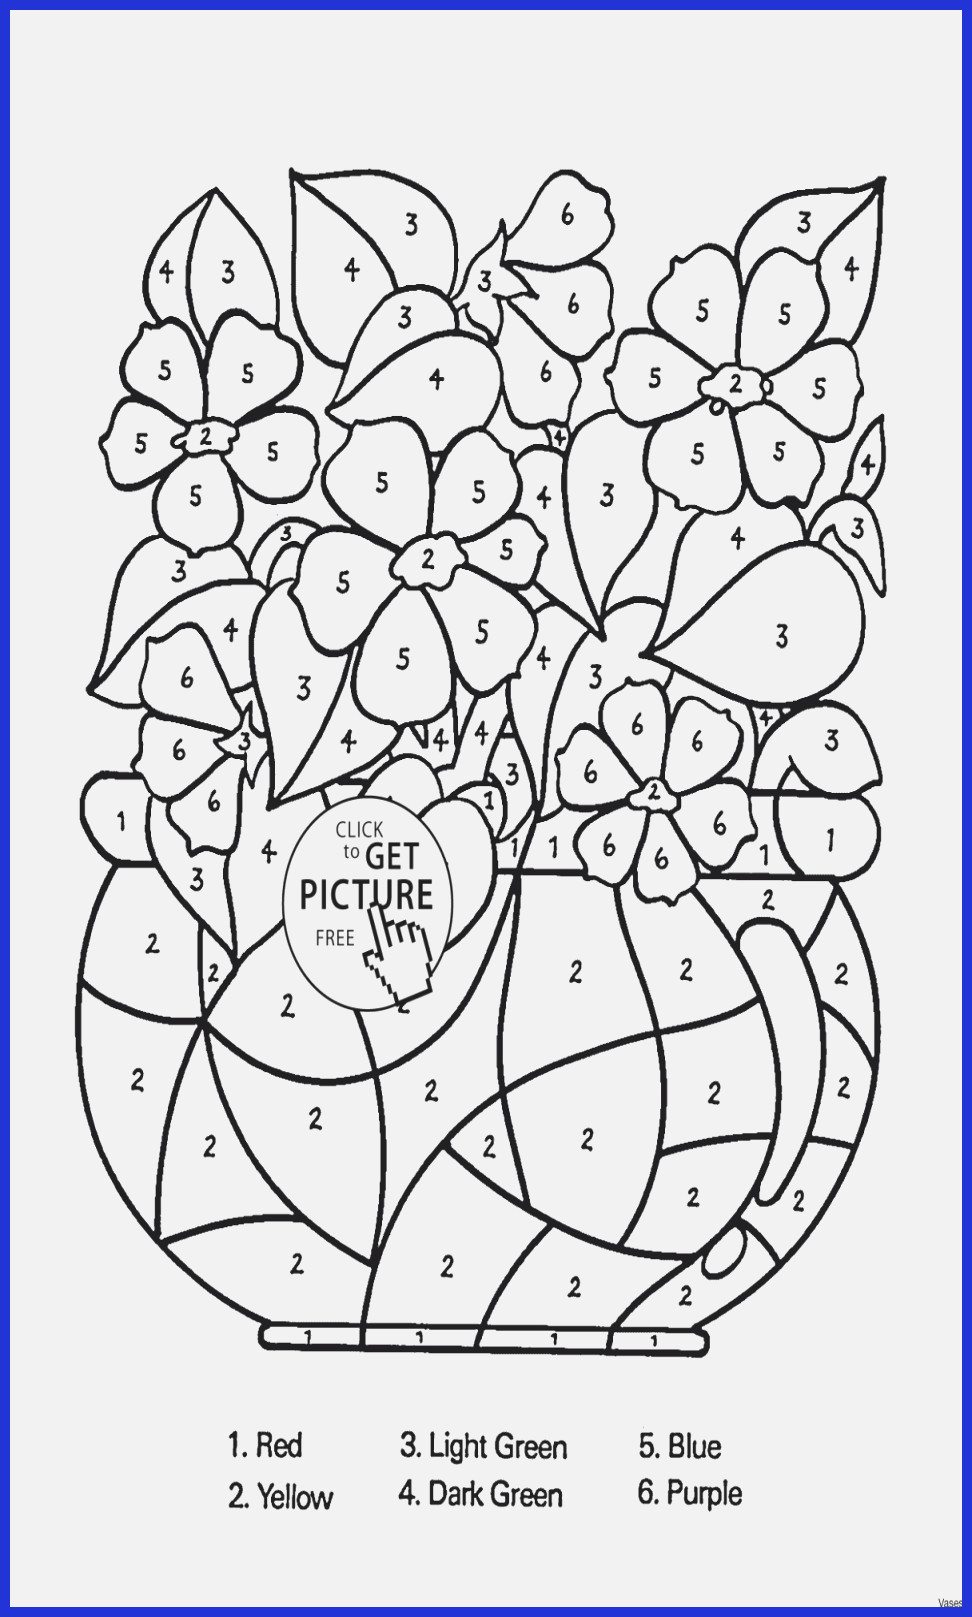 Food Pyramid Coloring Pages Color Number Food Awesome Food Pyramid Coloring Sheet Gallery